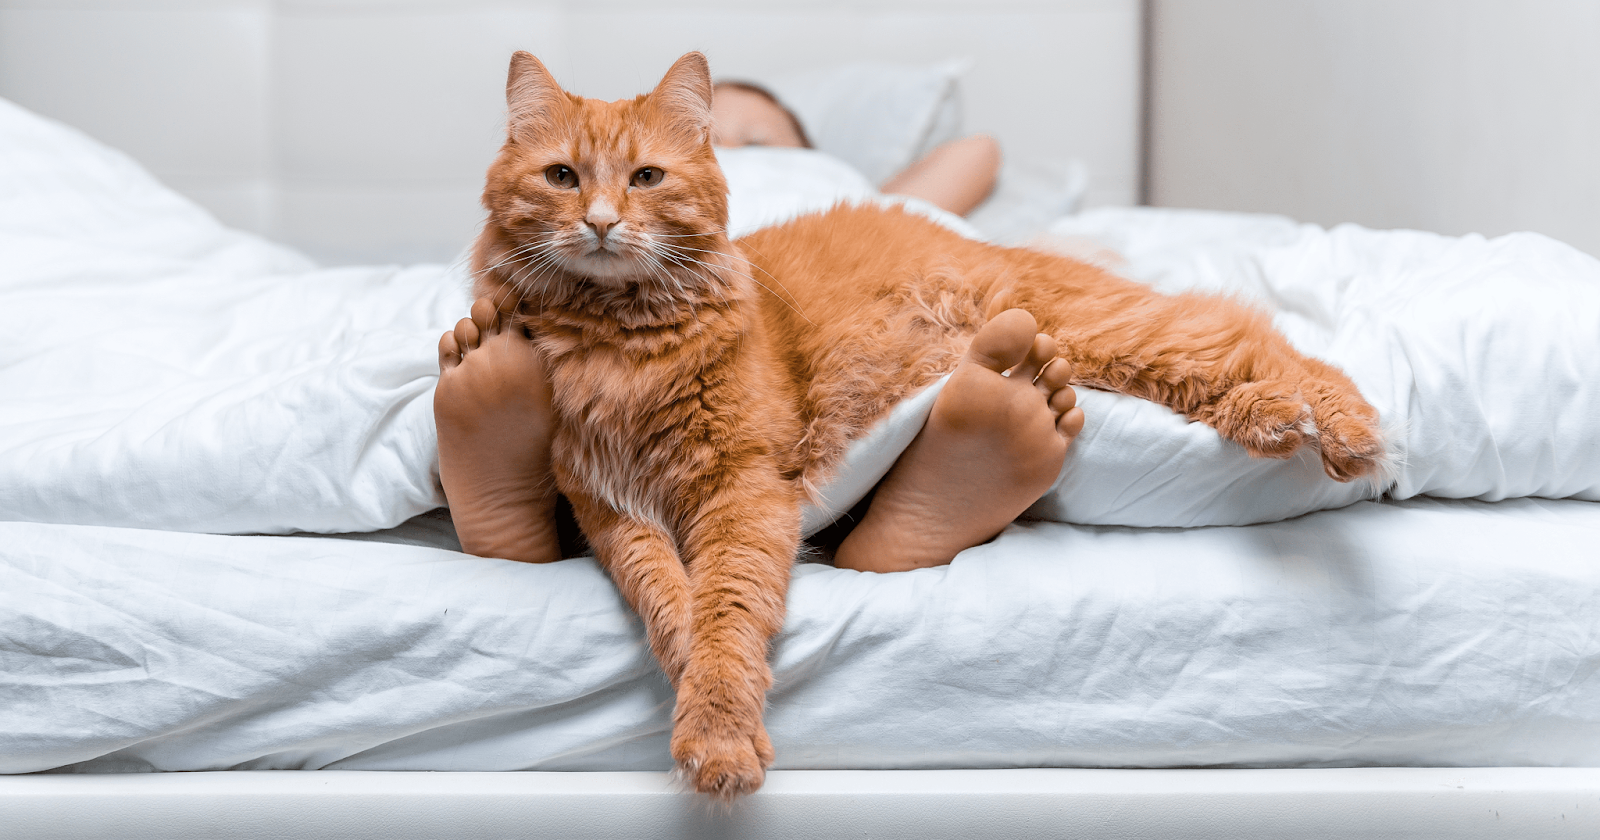 ginger cat on owners legs in bed